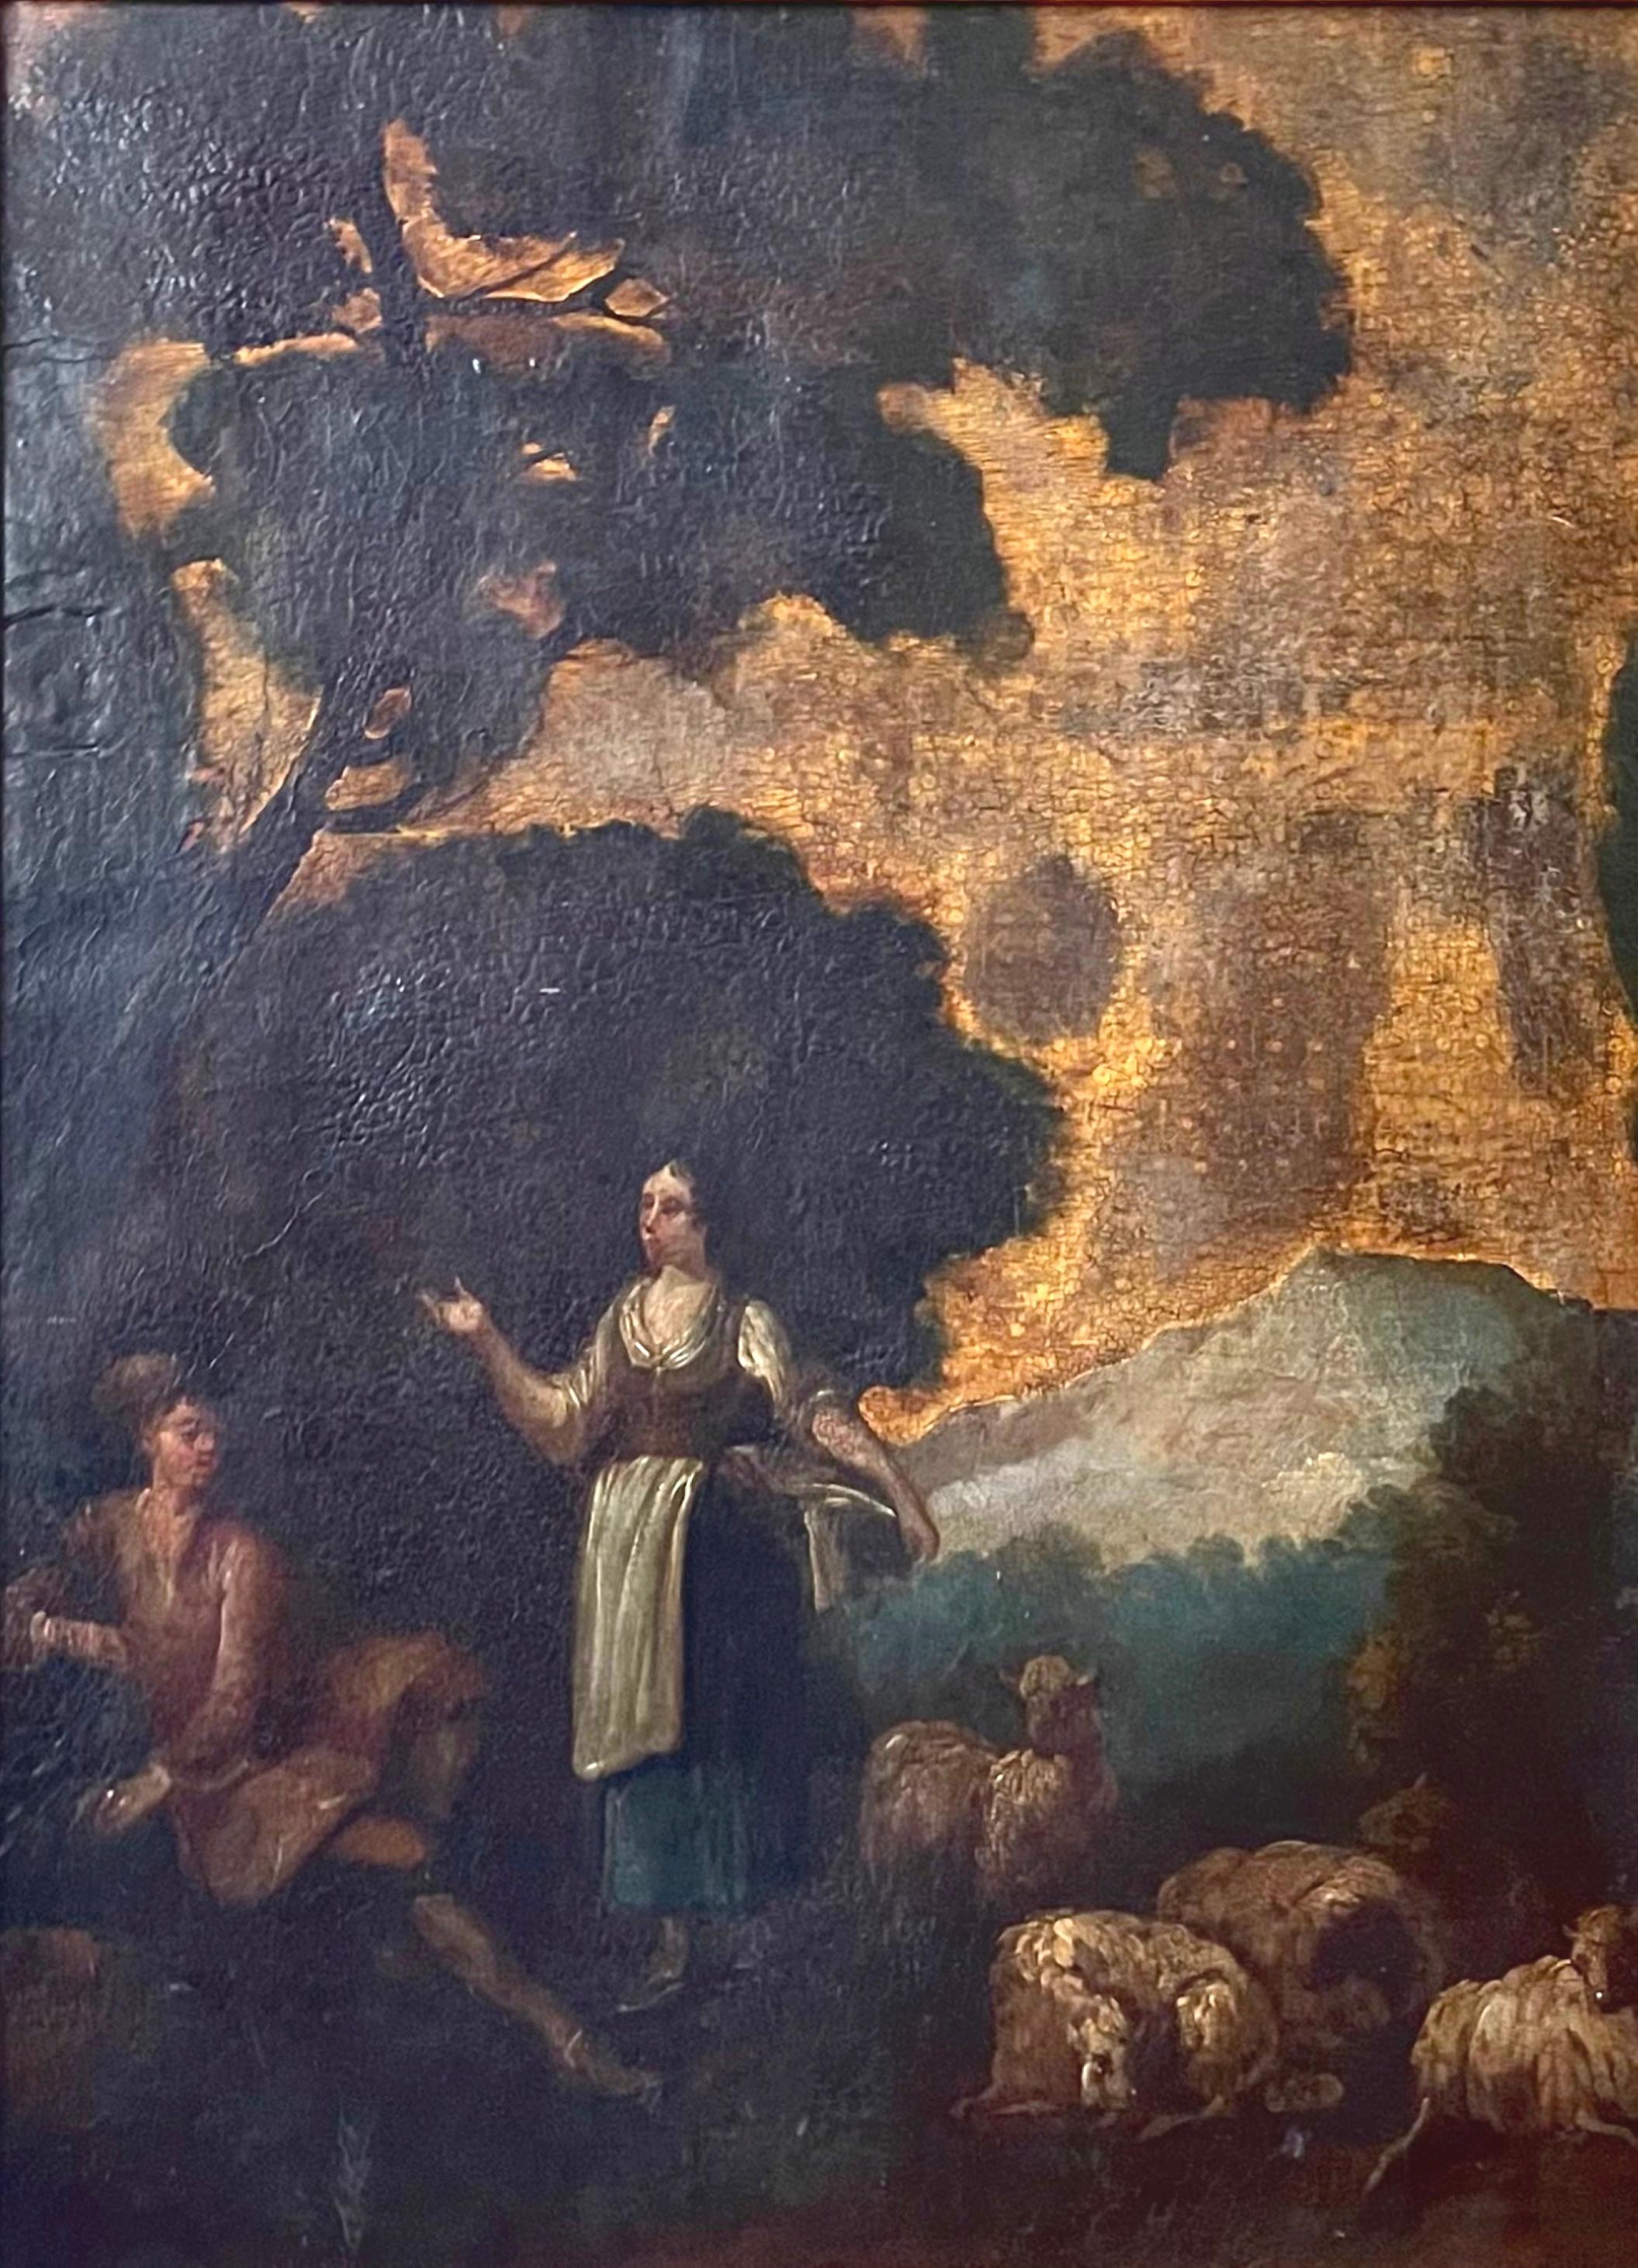 18th century French Baroque Old Master painting oil on leather.

Old Master painting, French Baroque period 18th century oil on leather represents a lush imaginary landscape in rich, deep colors with intense light and dark shadows. A shepherdess